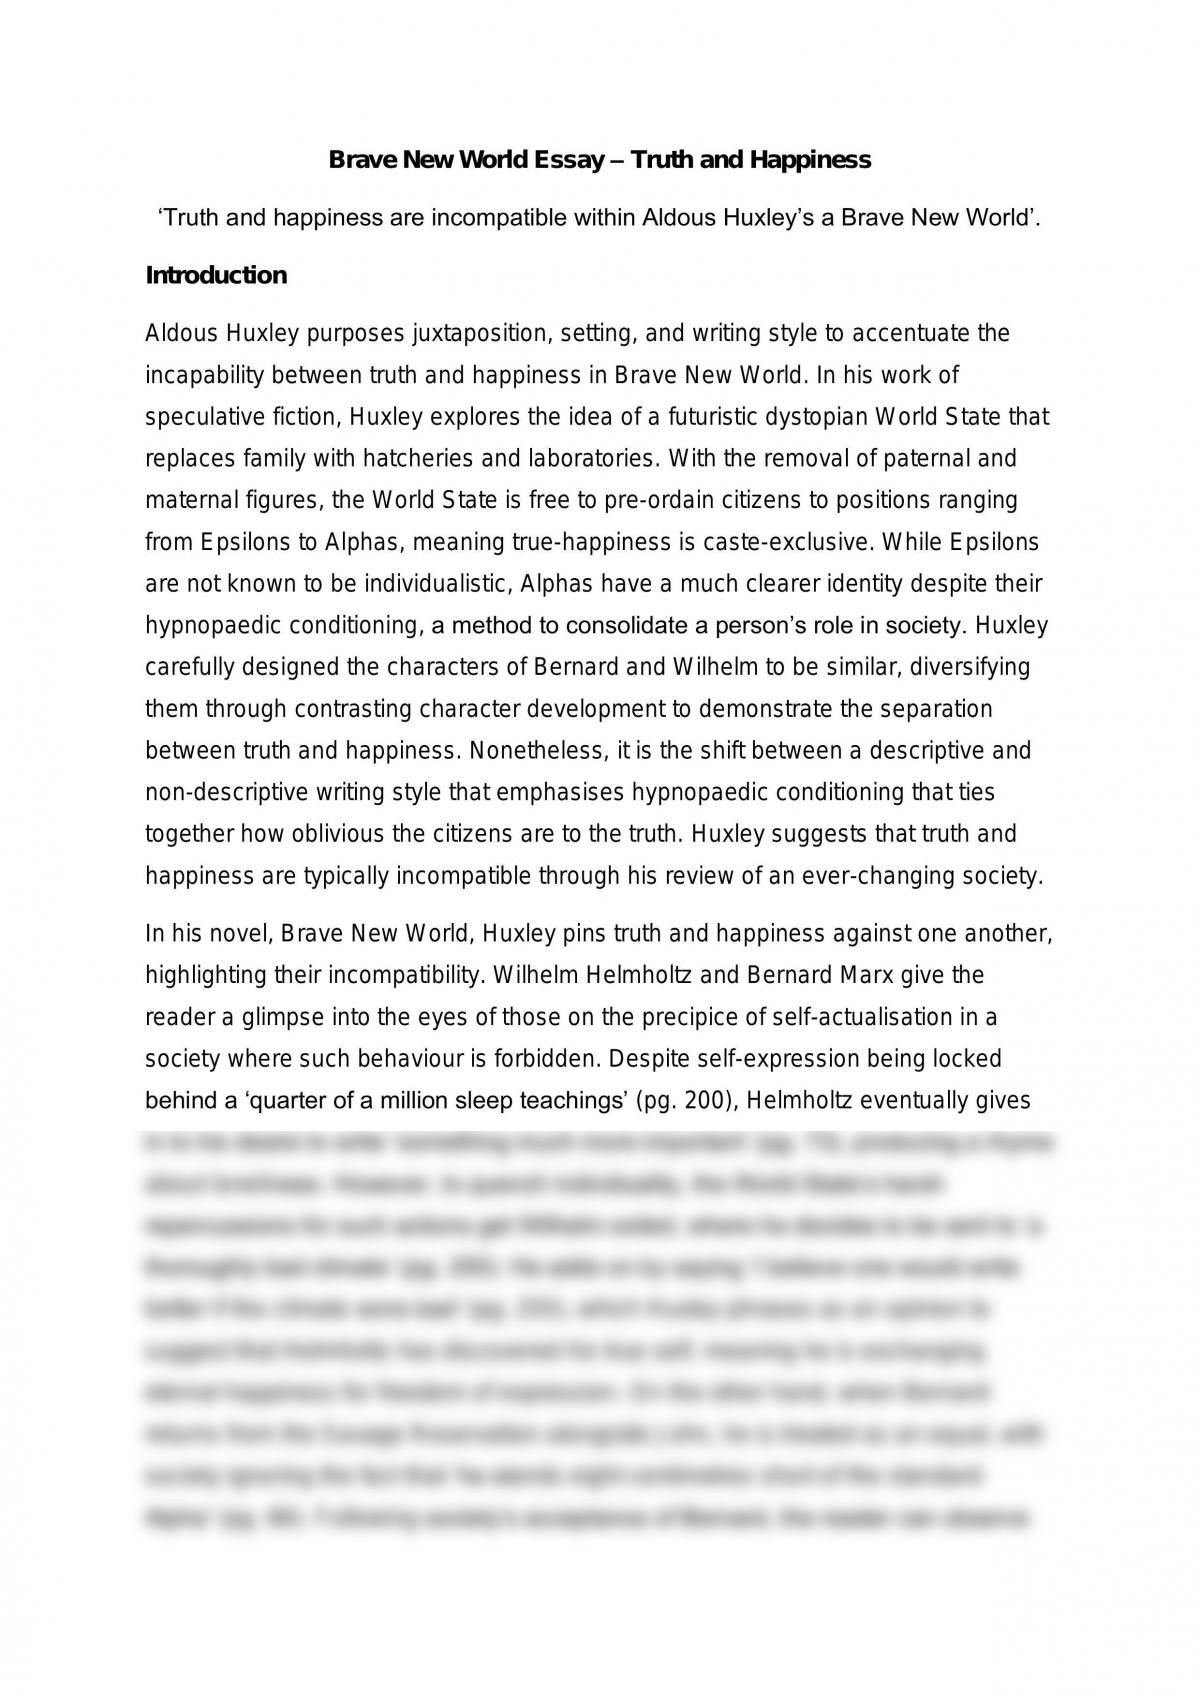 essay about brave new world